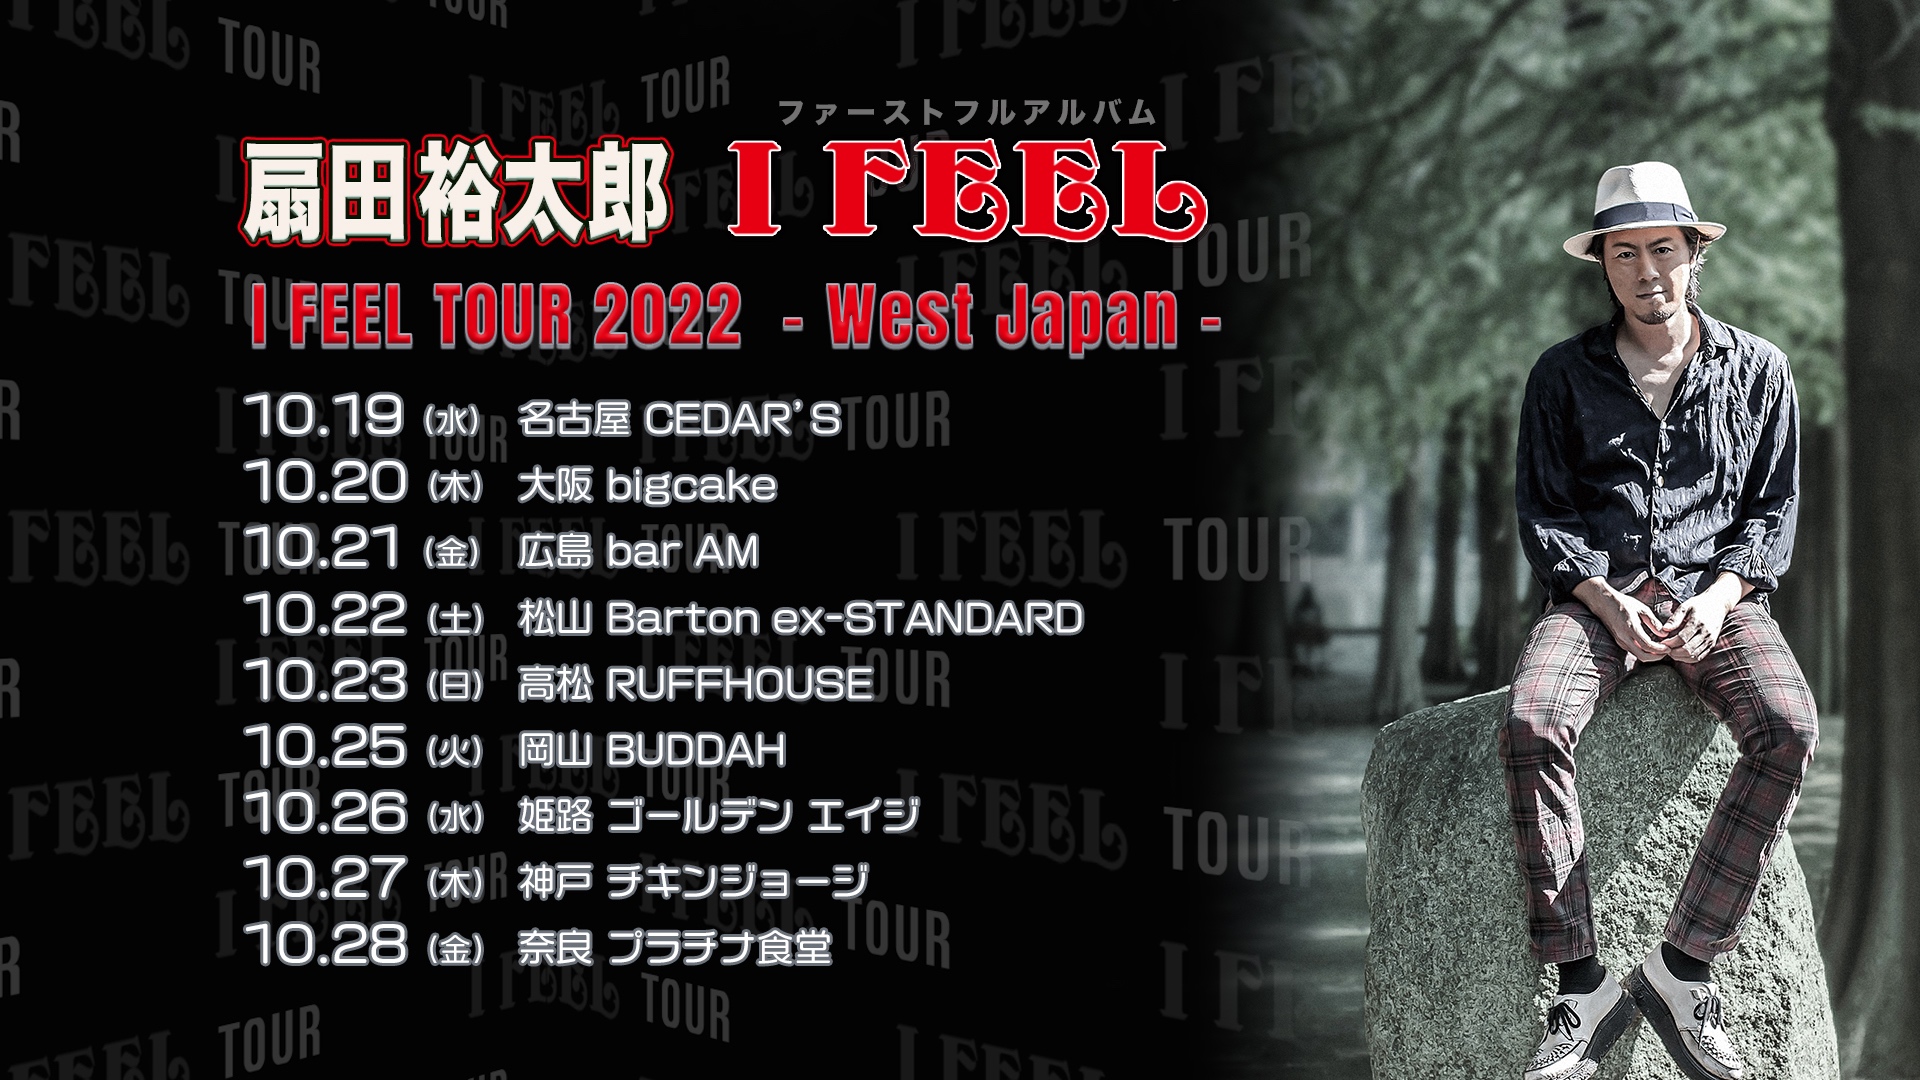 10/26(wed)  I FEEL TOUR 2022 -West Japan-【姫路ゴールデン エイジからLIVE配信】